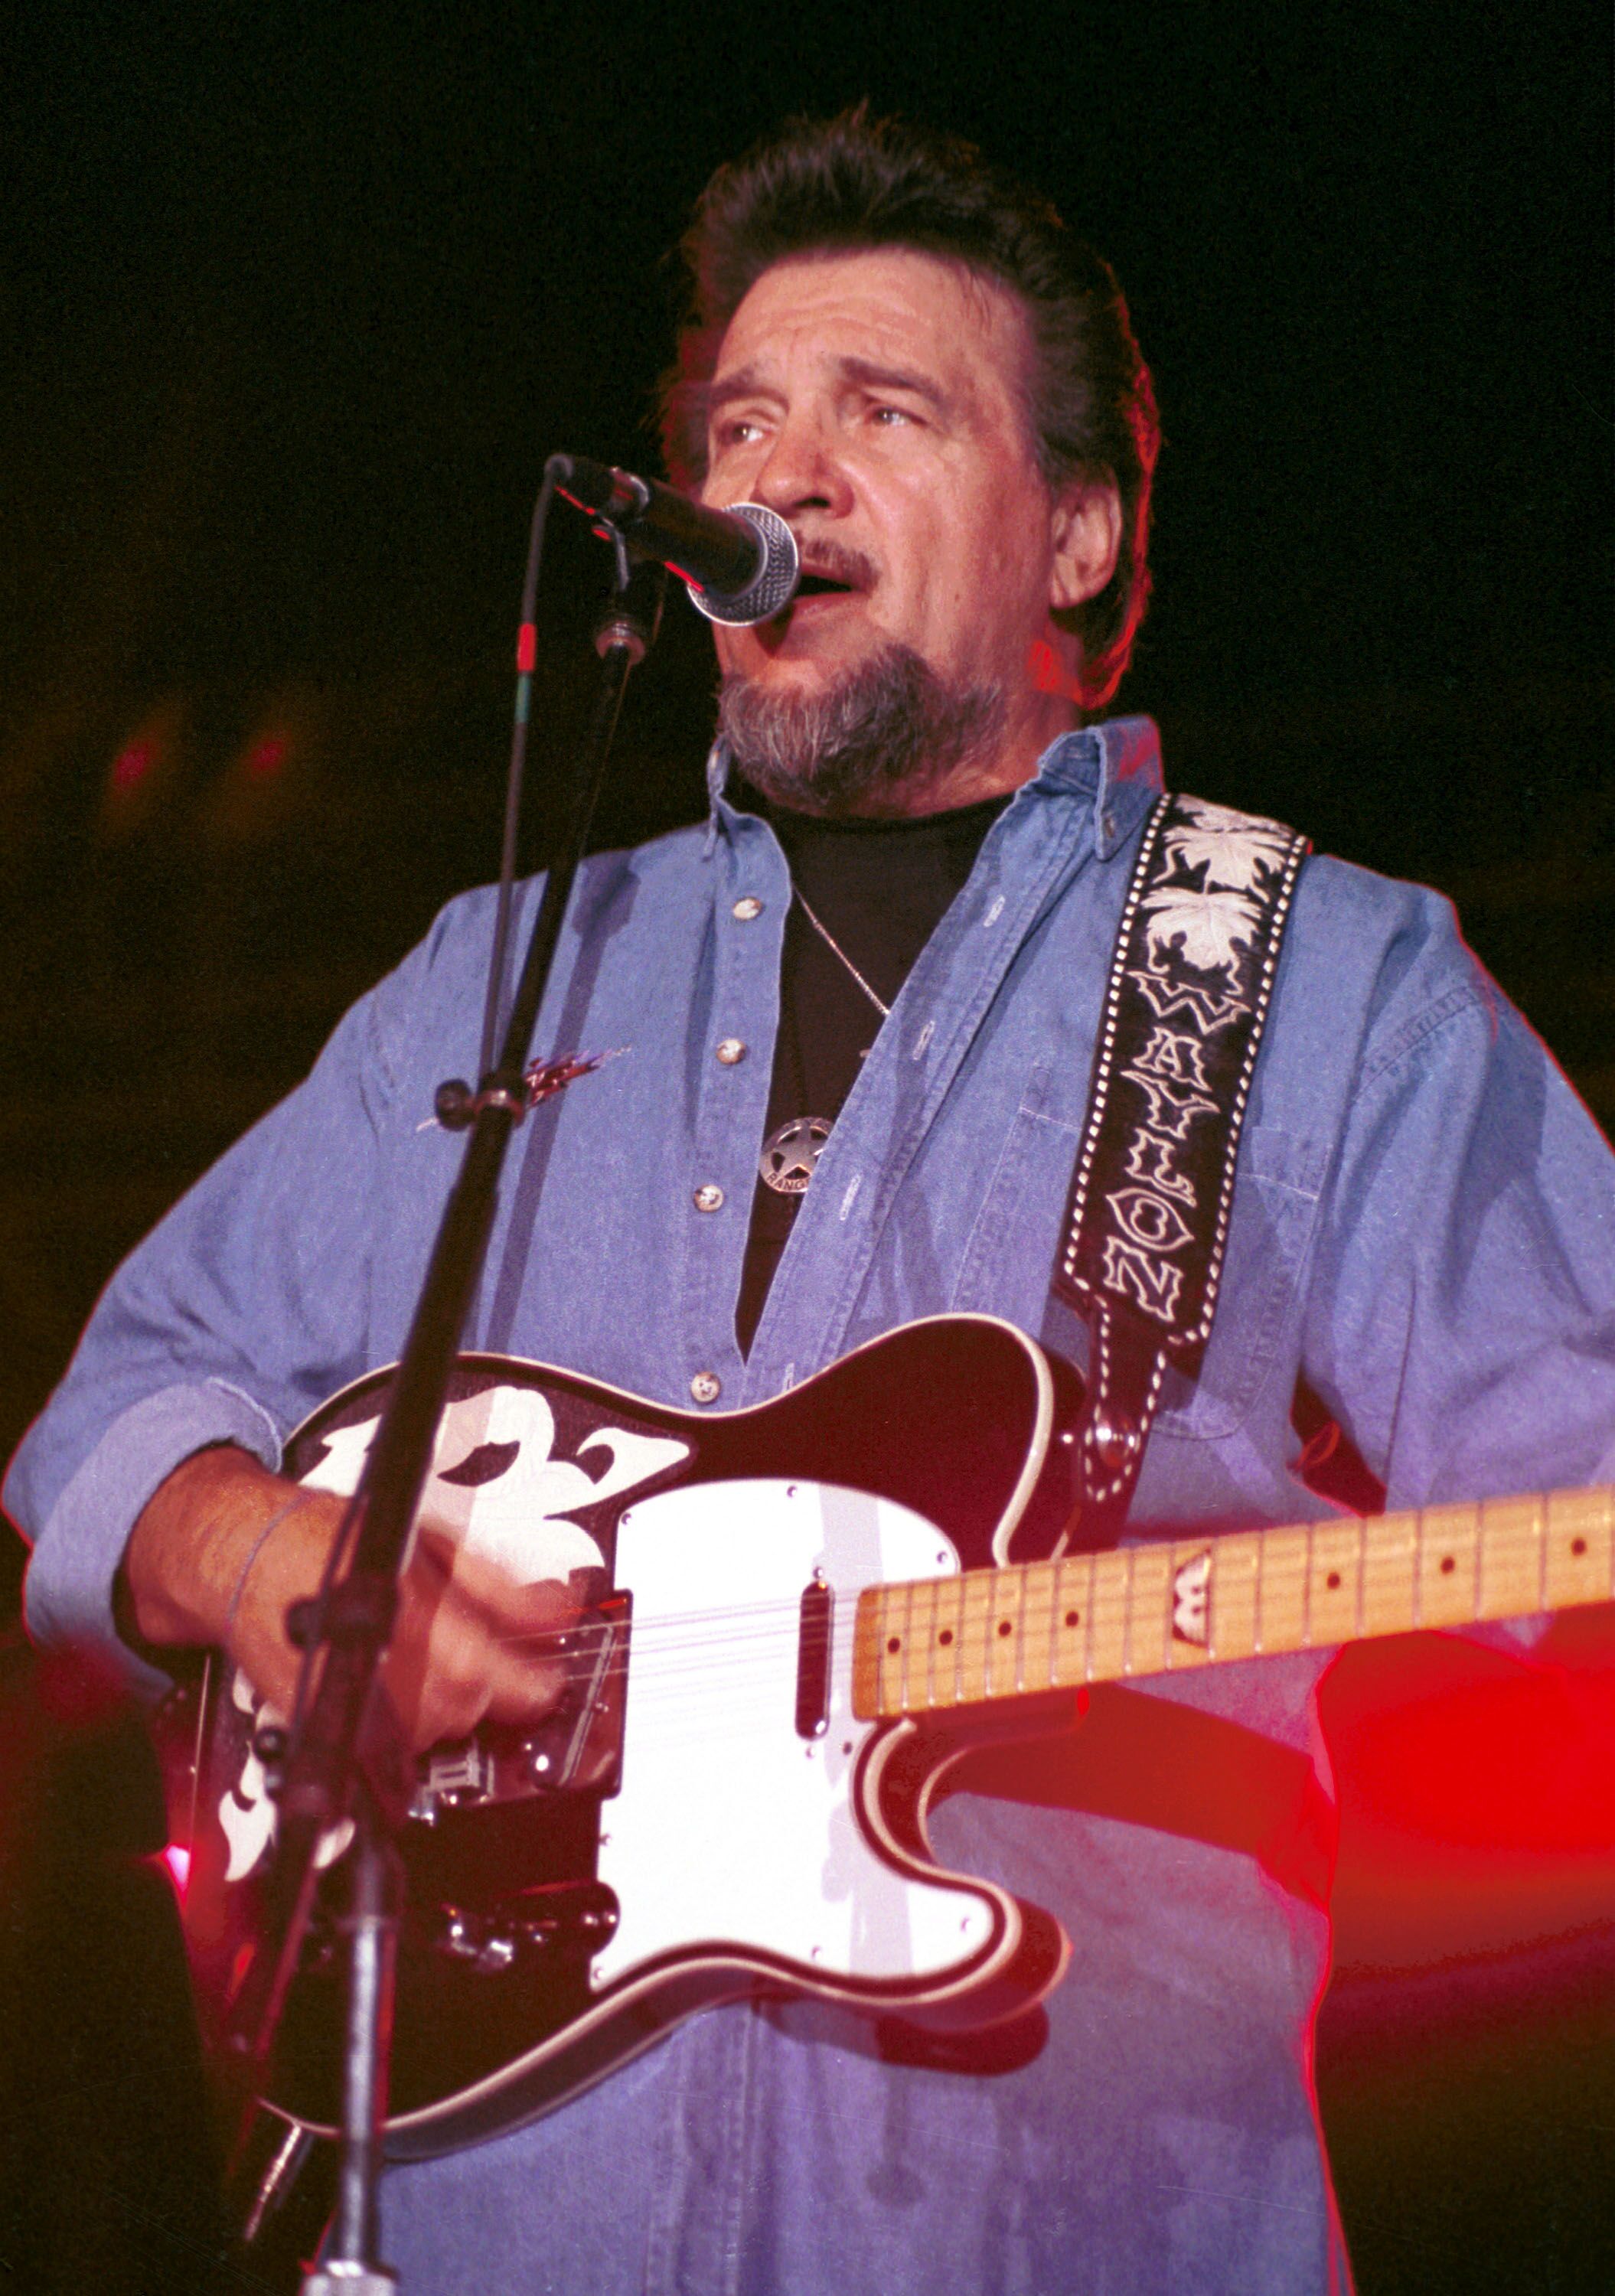 Waylon Jennings performs at the Highwaymen. | Source: Getty Images